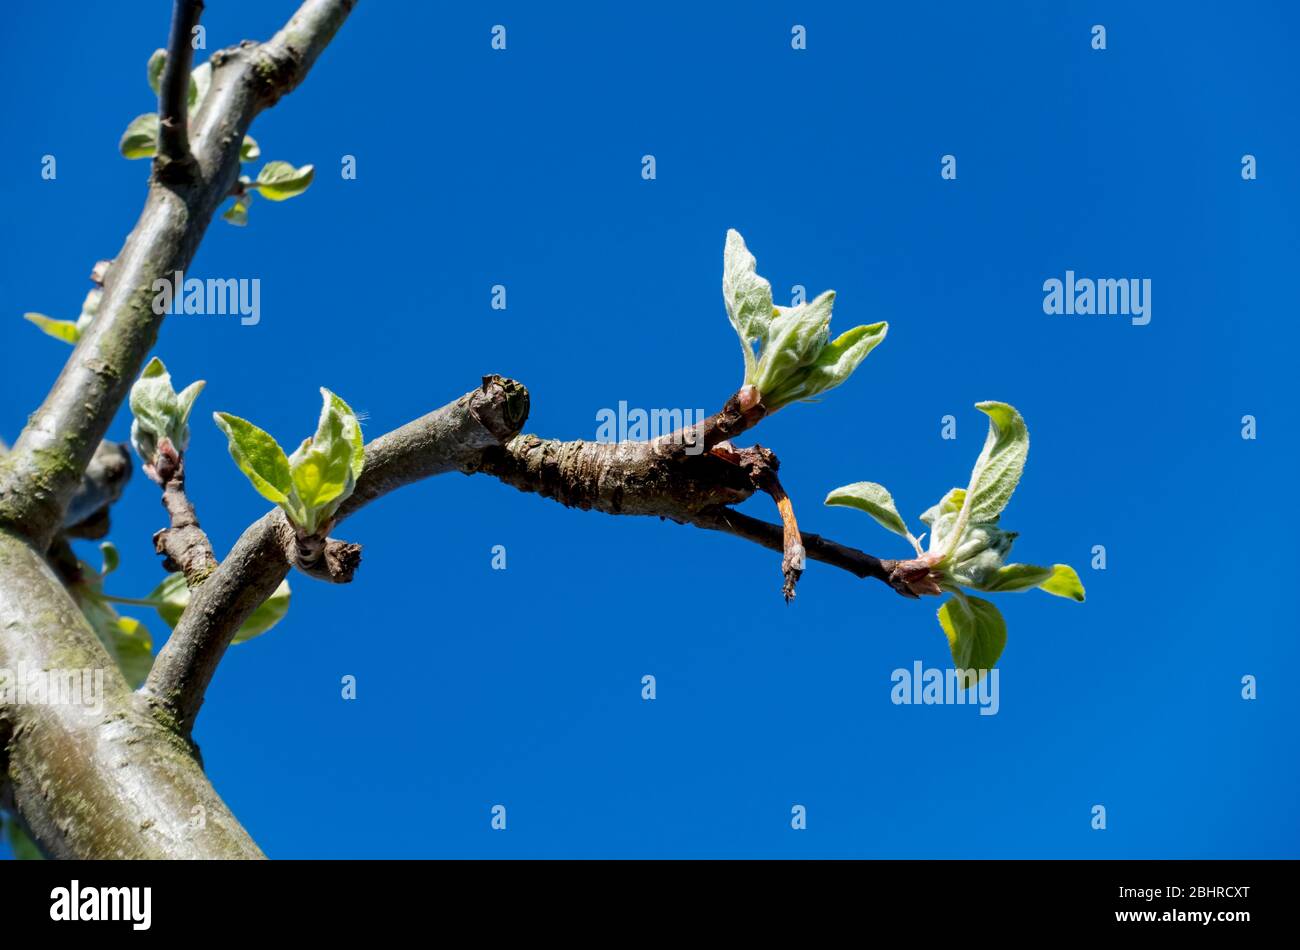 Close up of green new shoots buds on branch of Charles Ross apple tree in spring against bright blue sky England UK United Kingdom GB Great Britain Stock Photo